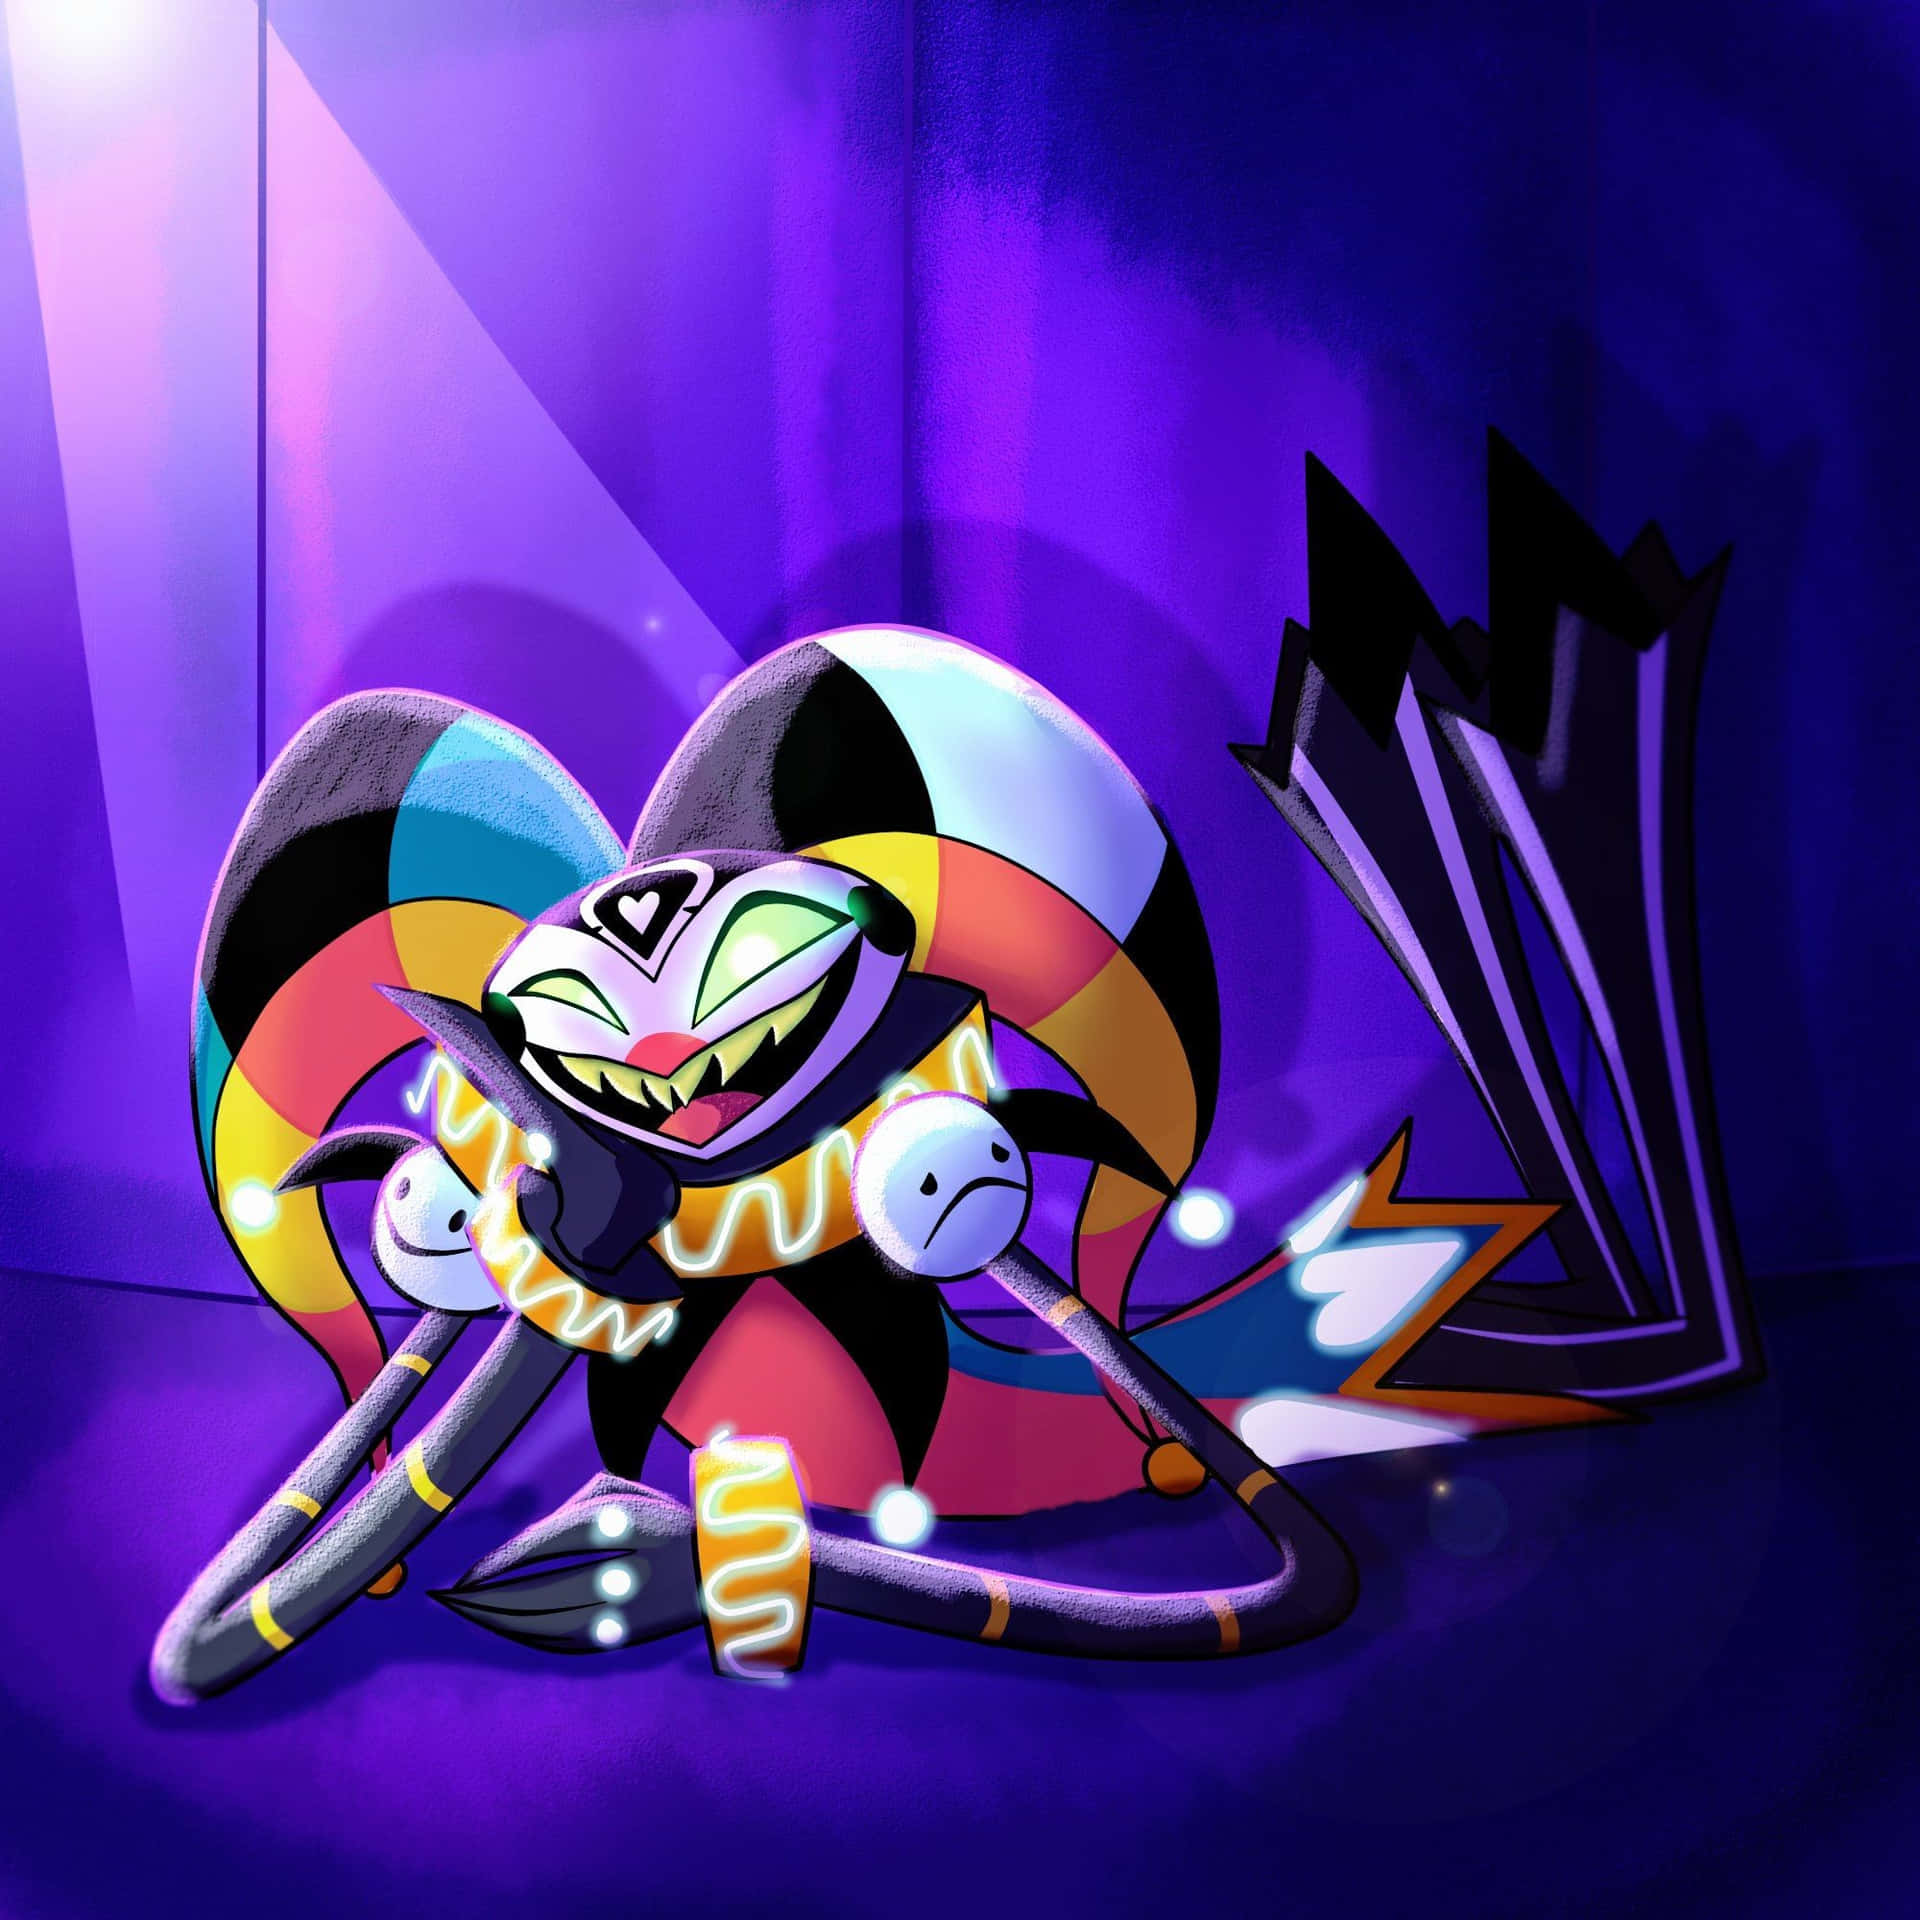 Colorful_ Jester_ Character_ Artwork Wallpaper